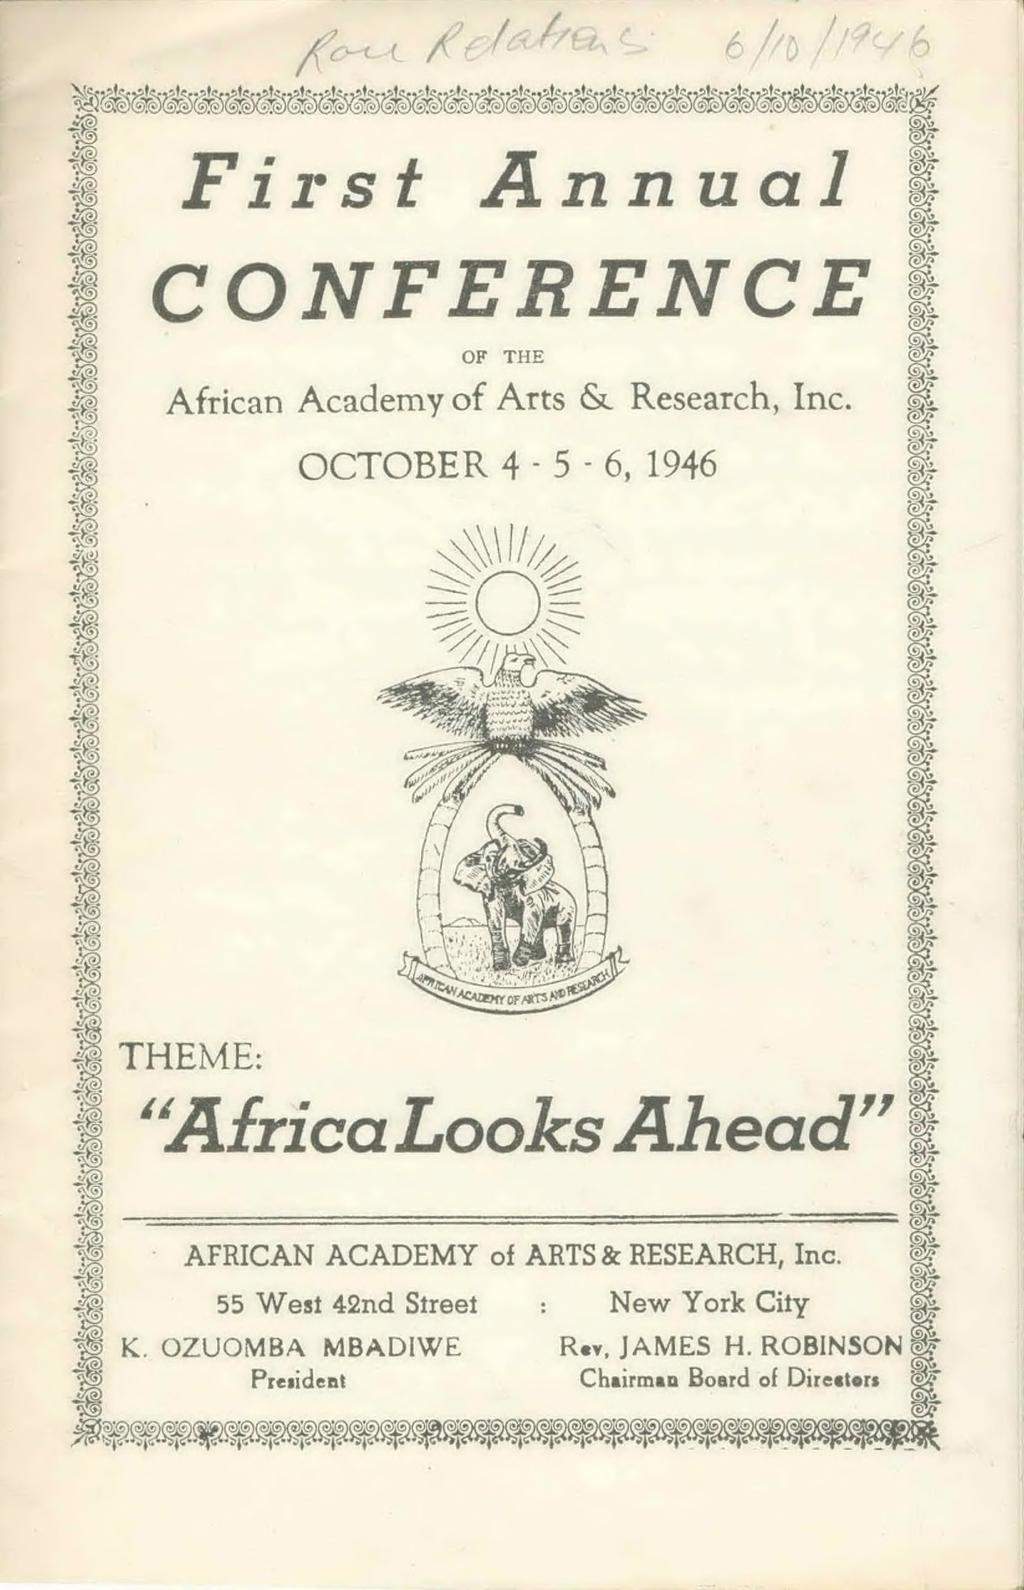 <K > J * > W» 1 1 xs> s i j 1 First Annual CONFERENCE OF THE African Academy of Arts & Research, Inc. O C T O B E R 4-5-6, 1946 <SX @e Sji.4 K jp 4m <v<5) % Africa.